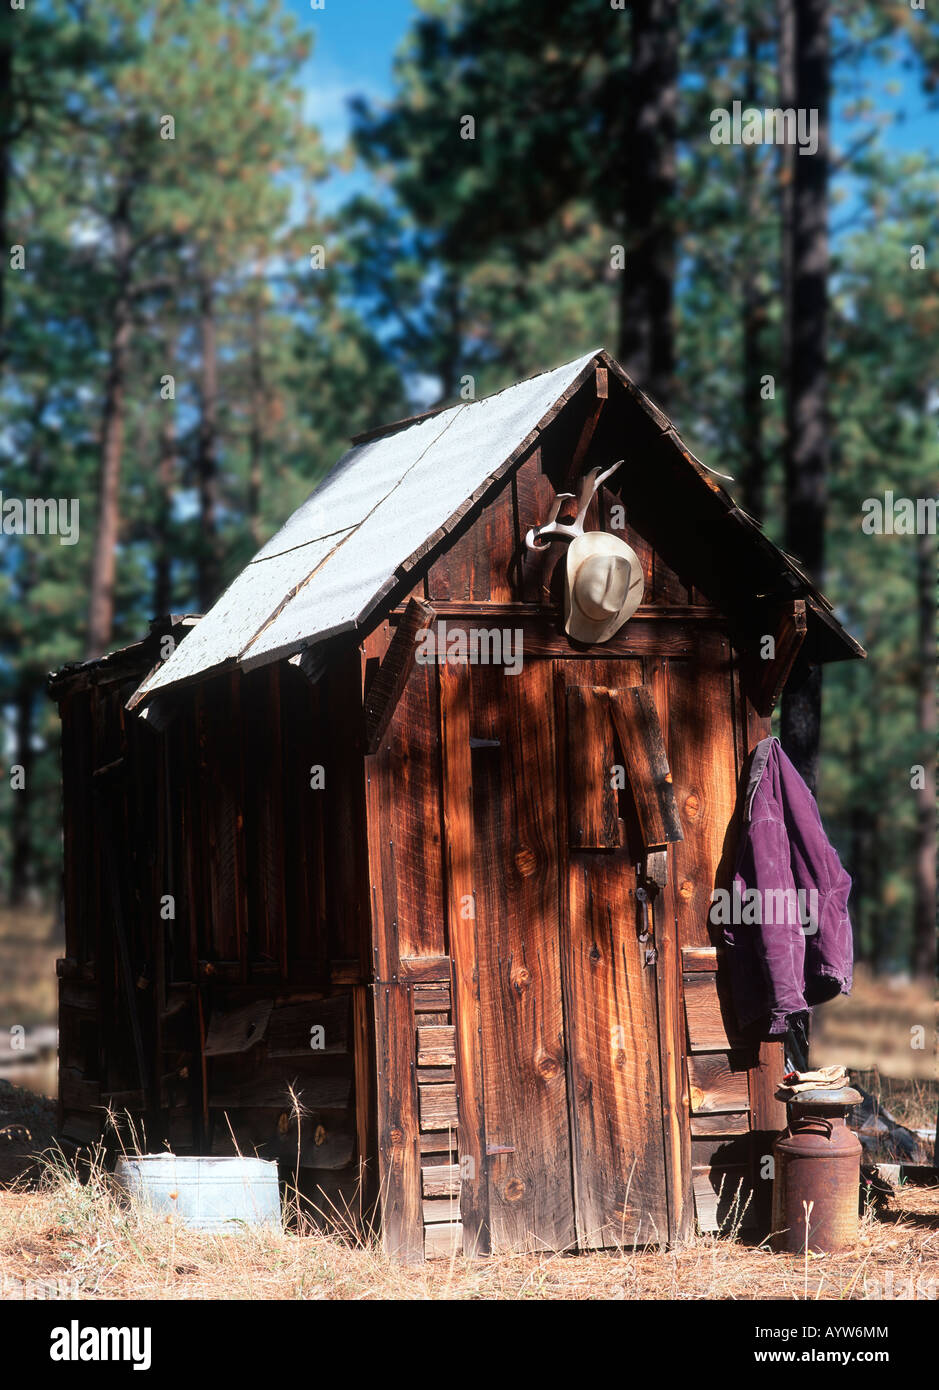 Cowboy hat hangs above a rural outhouse (water closet) signifying the toilet is in use. Stock Photo